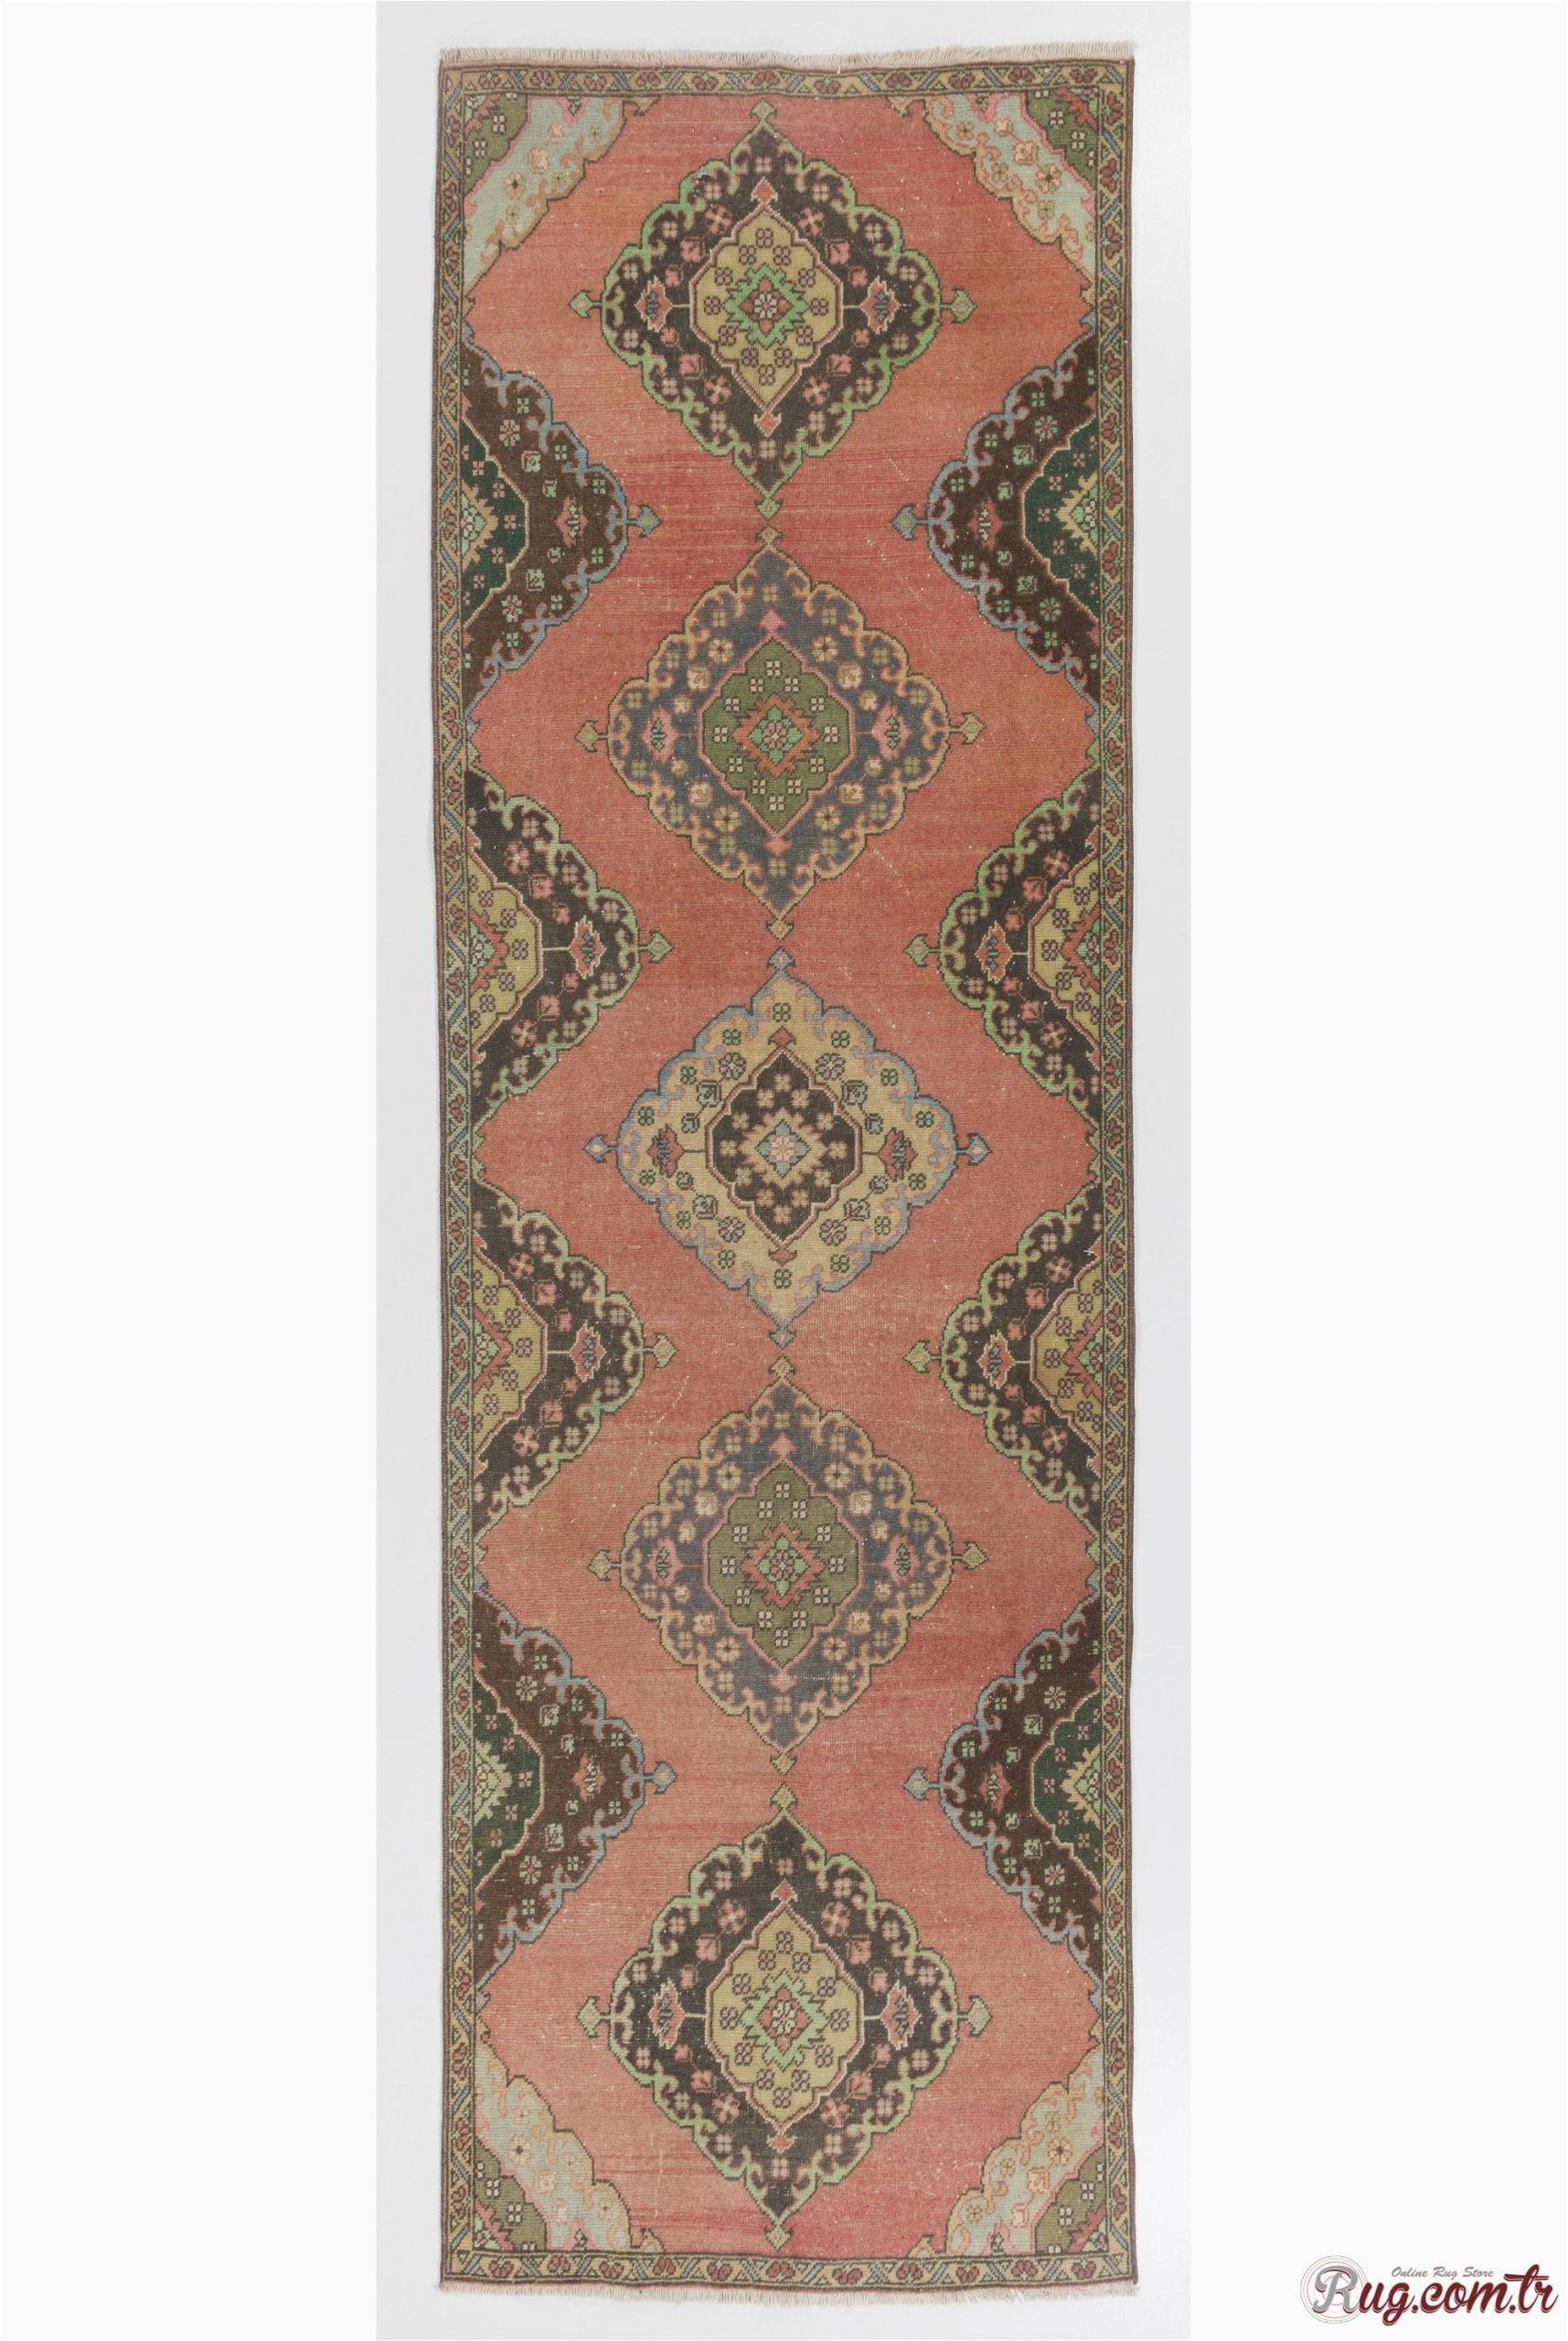 Blue and Green Runner Rug Sun Faded Runner Rug Peach Brown and Blue Color Vintage